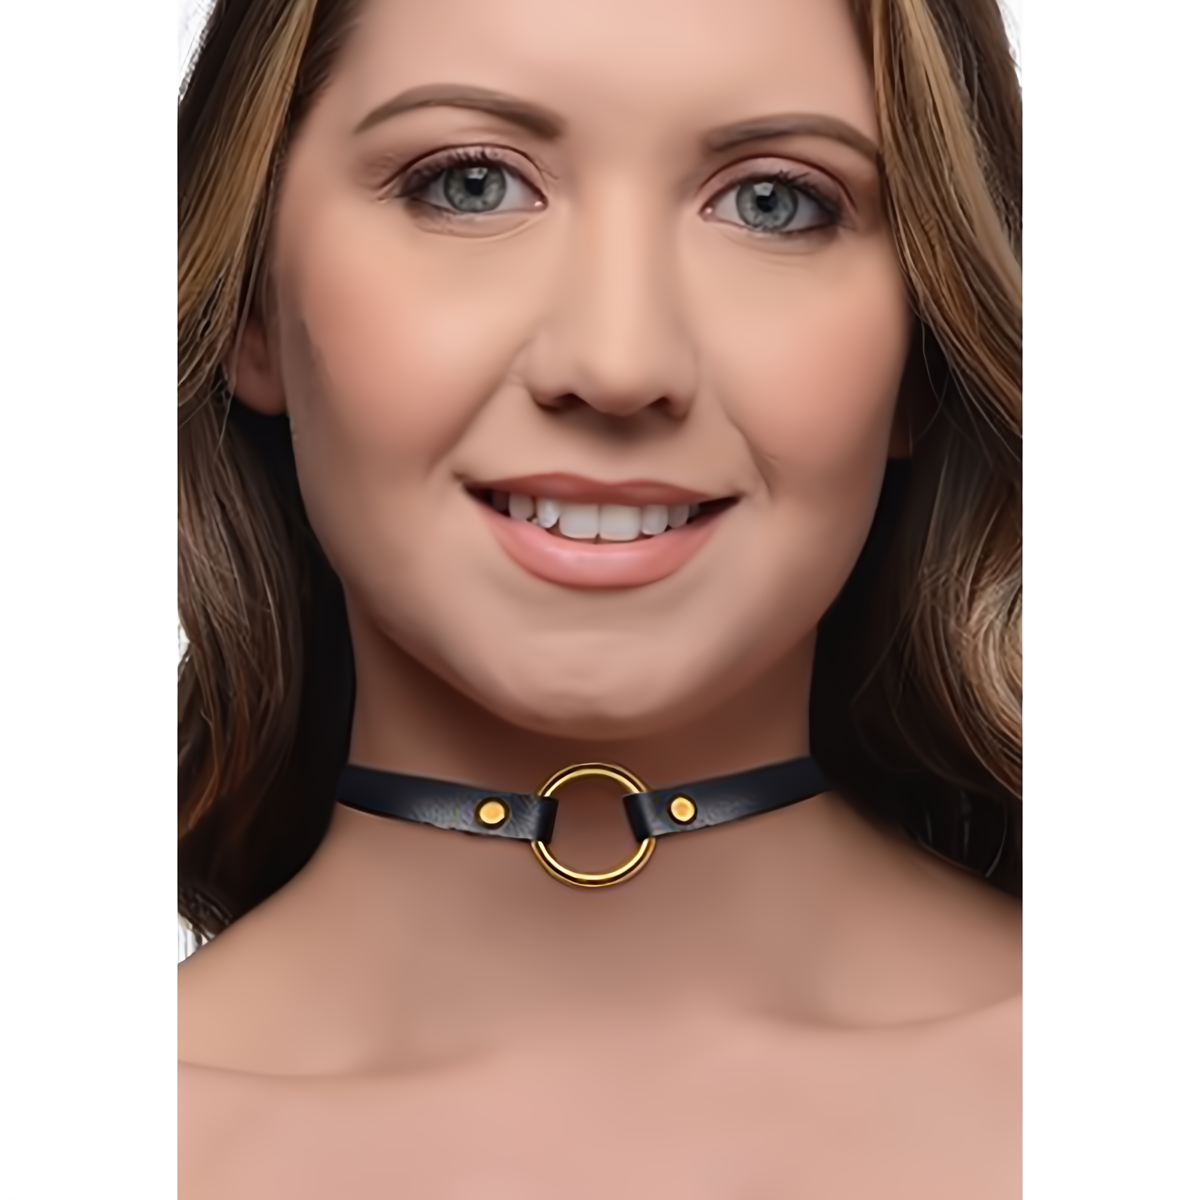 Posh Pet - Narrow Leather Collar with Gold Details